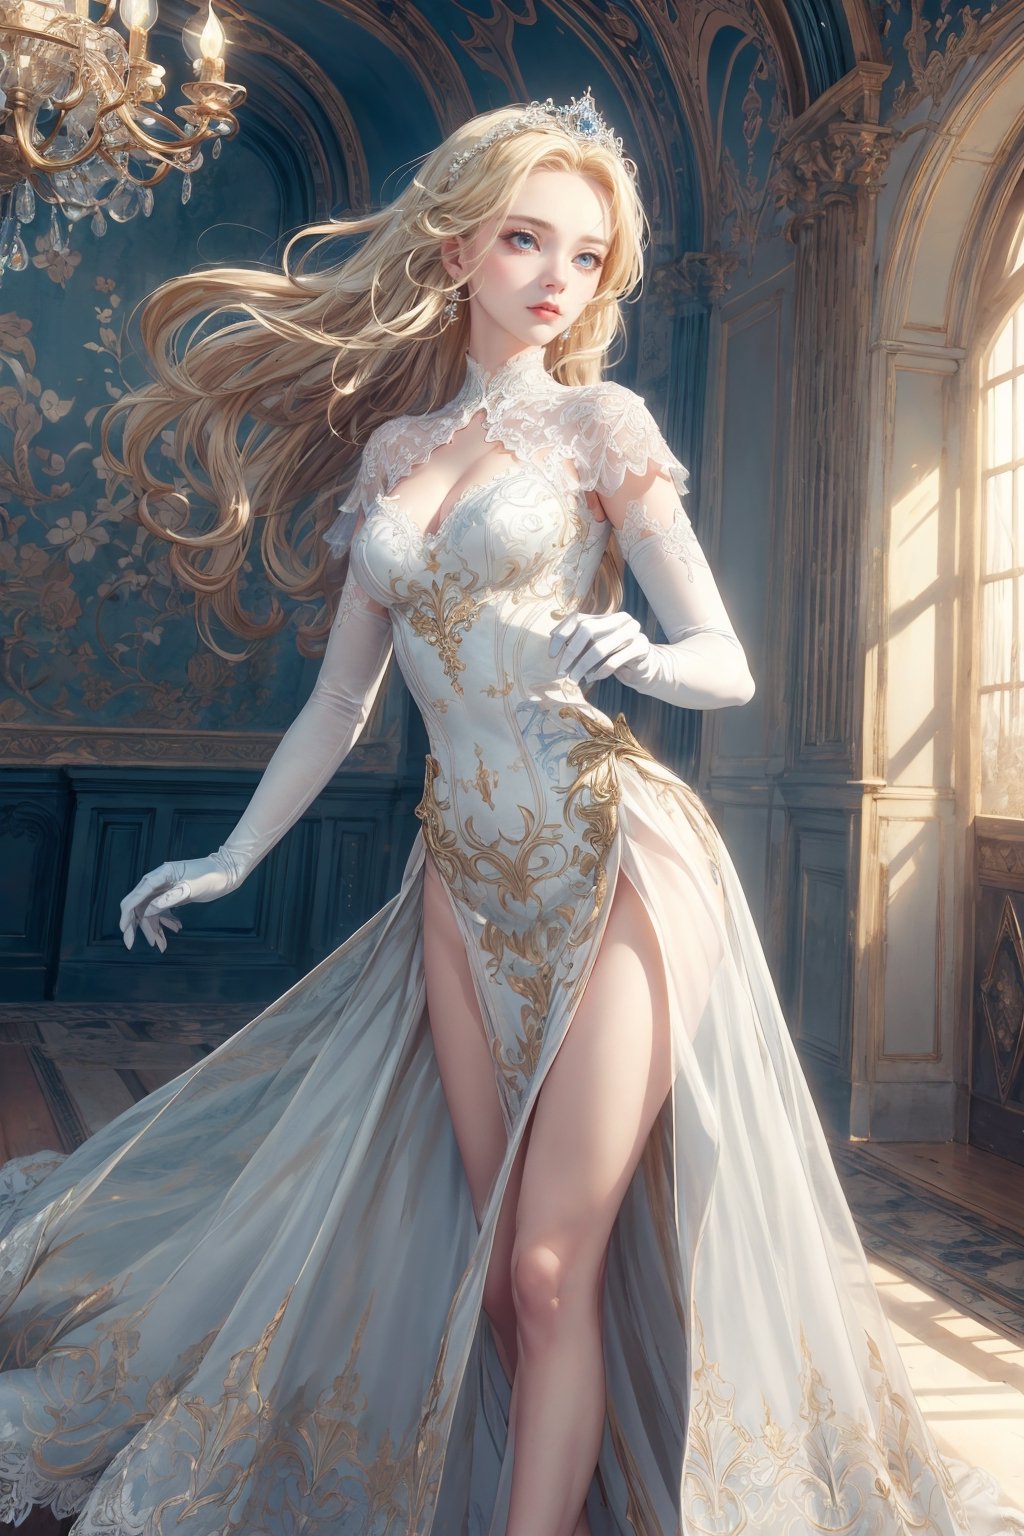 (best quality+best lighting+best masterpiece), (expressive+detailed+emotional eyes), (extremely detailed 8k CG unit wallpaper), (detailed hair+well illustrated), a girl with long blonde hair, white, papery skin, pearly blue eyes, expressive, with emotions, wearing a pretty princess dress, white silk gloves, dress with transparent lace and ruffles, long blonde hair, in a curly cascade beautiful dance hall scenery background, (good+cinematic lighting)